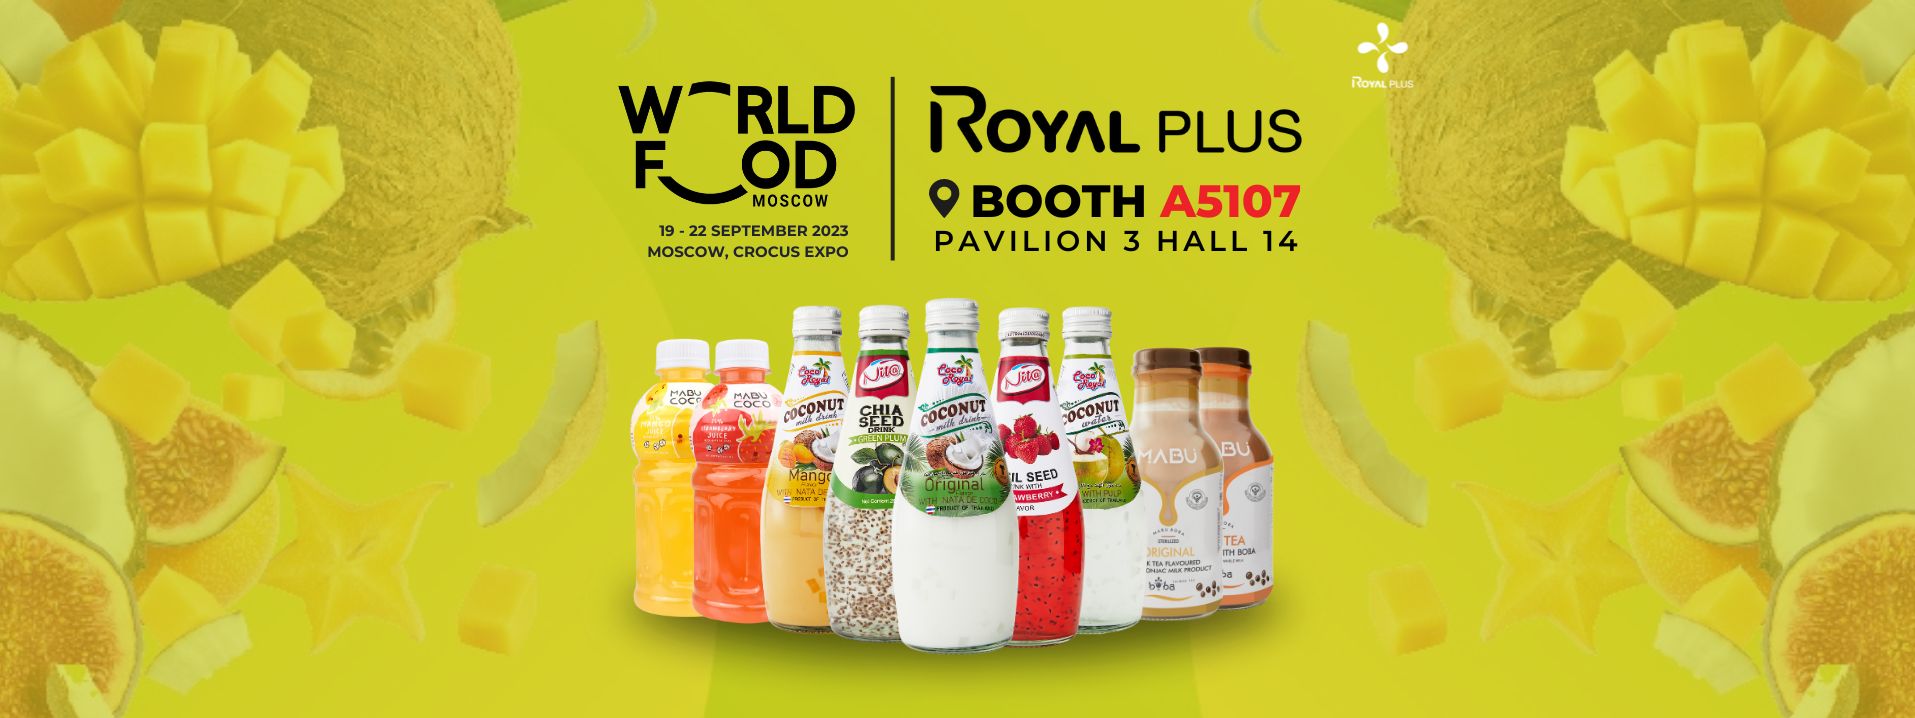 Visit Our Booth at WorldFood Moscow 2023 Exhibition!